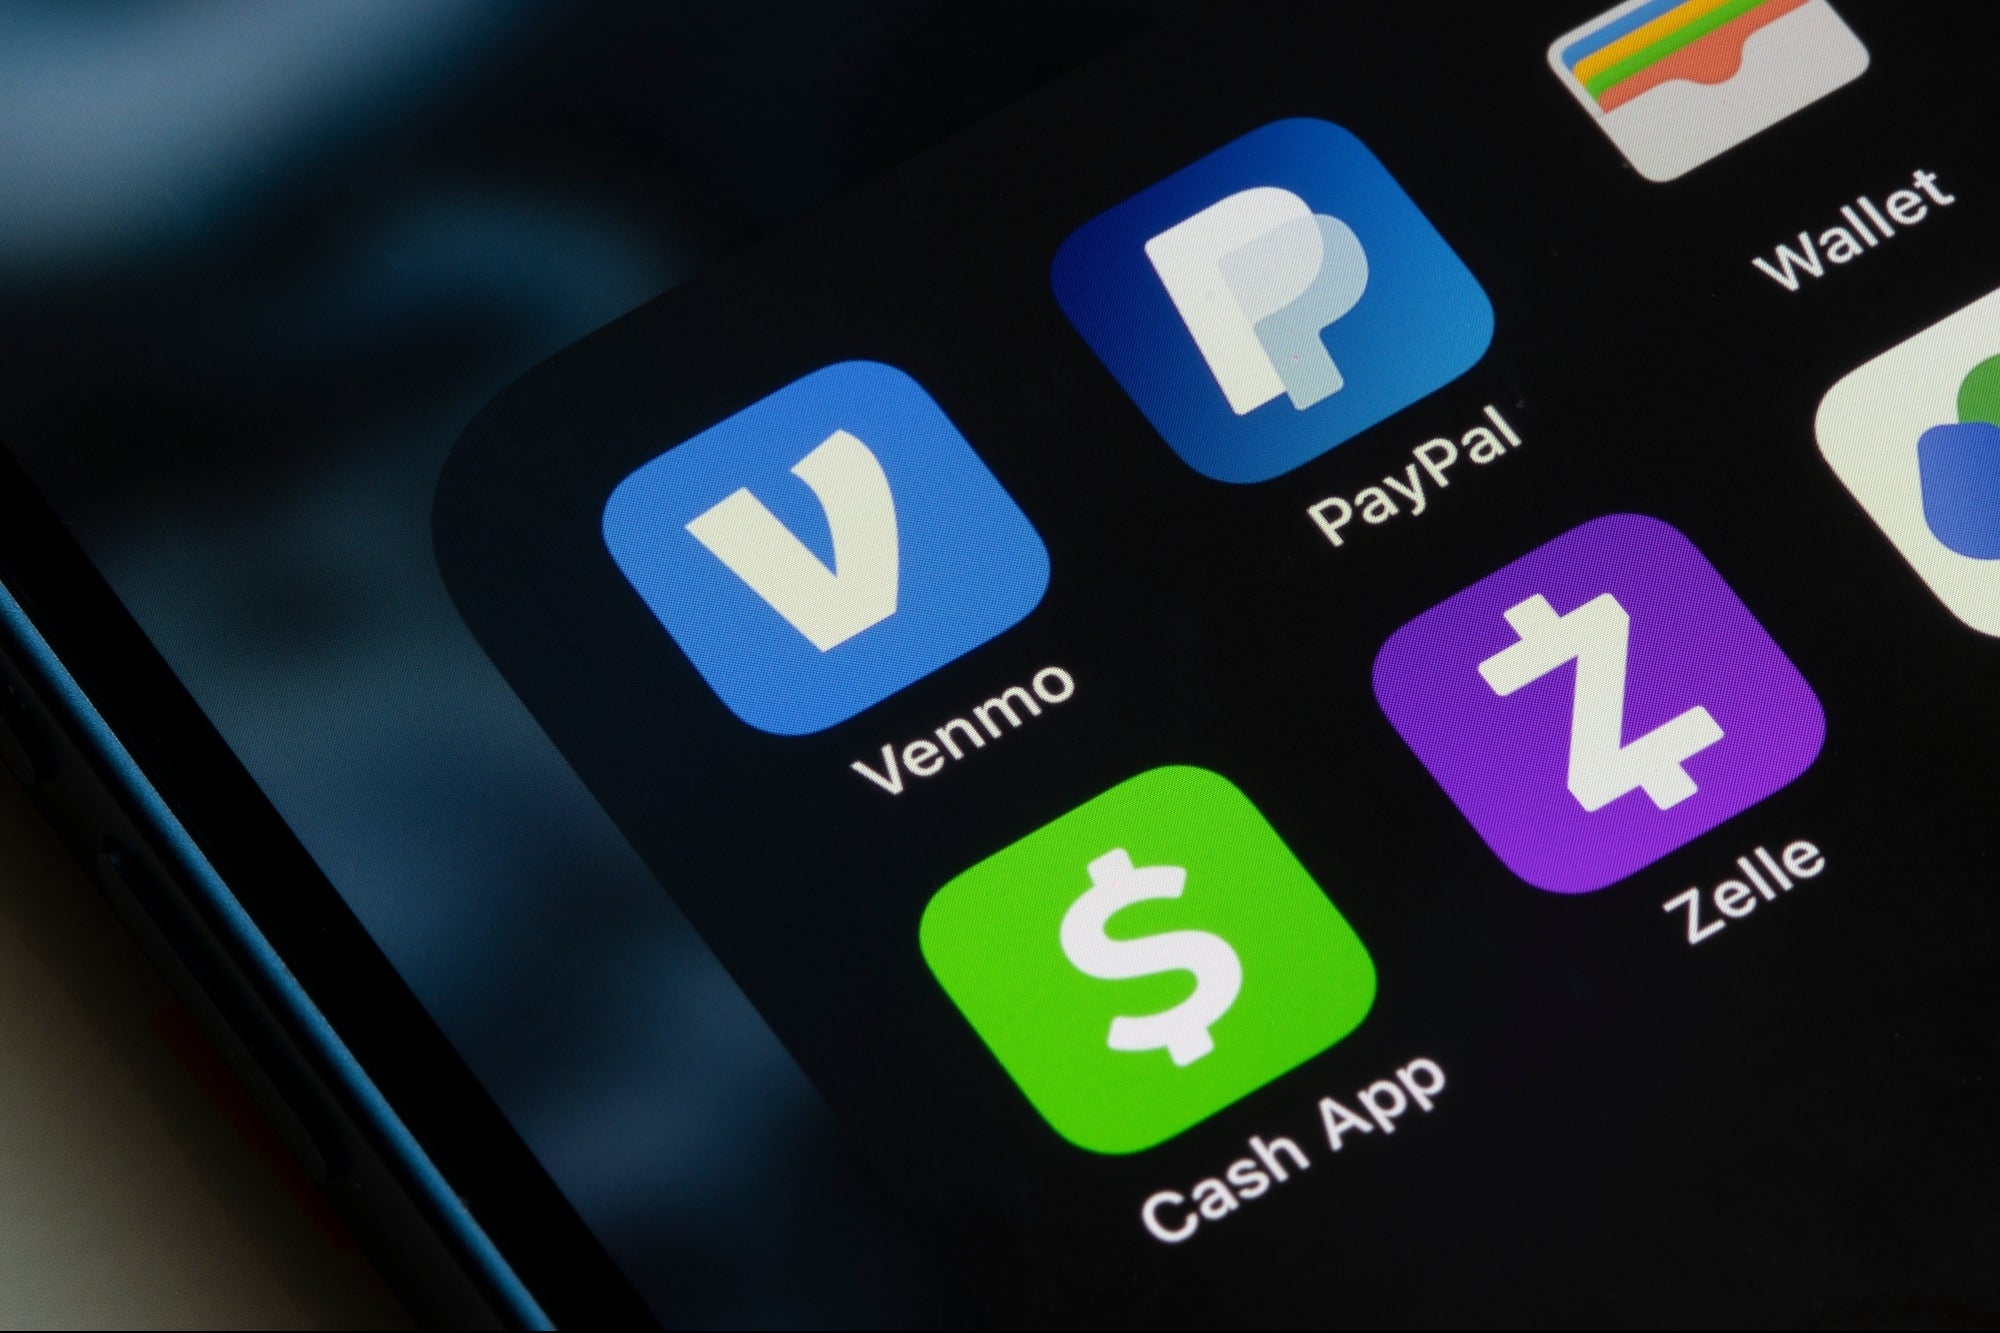 venmo-launches-its-physical-debit-card-in-beta-program